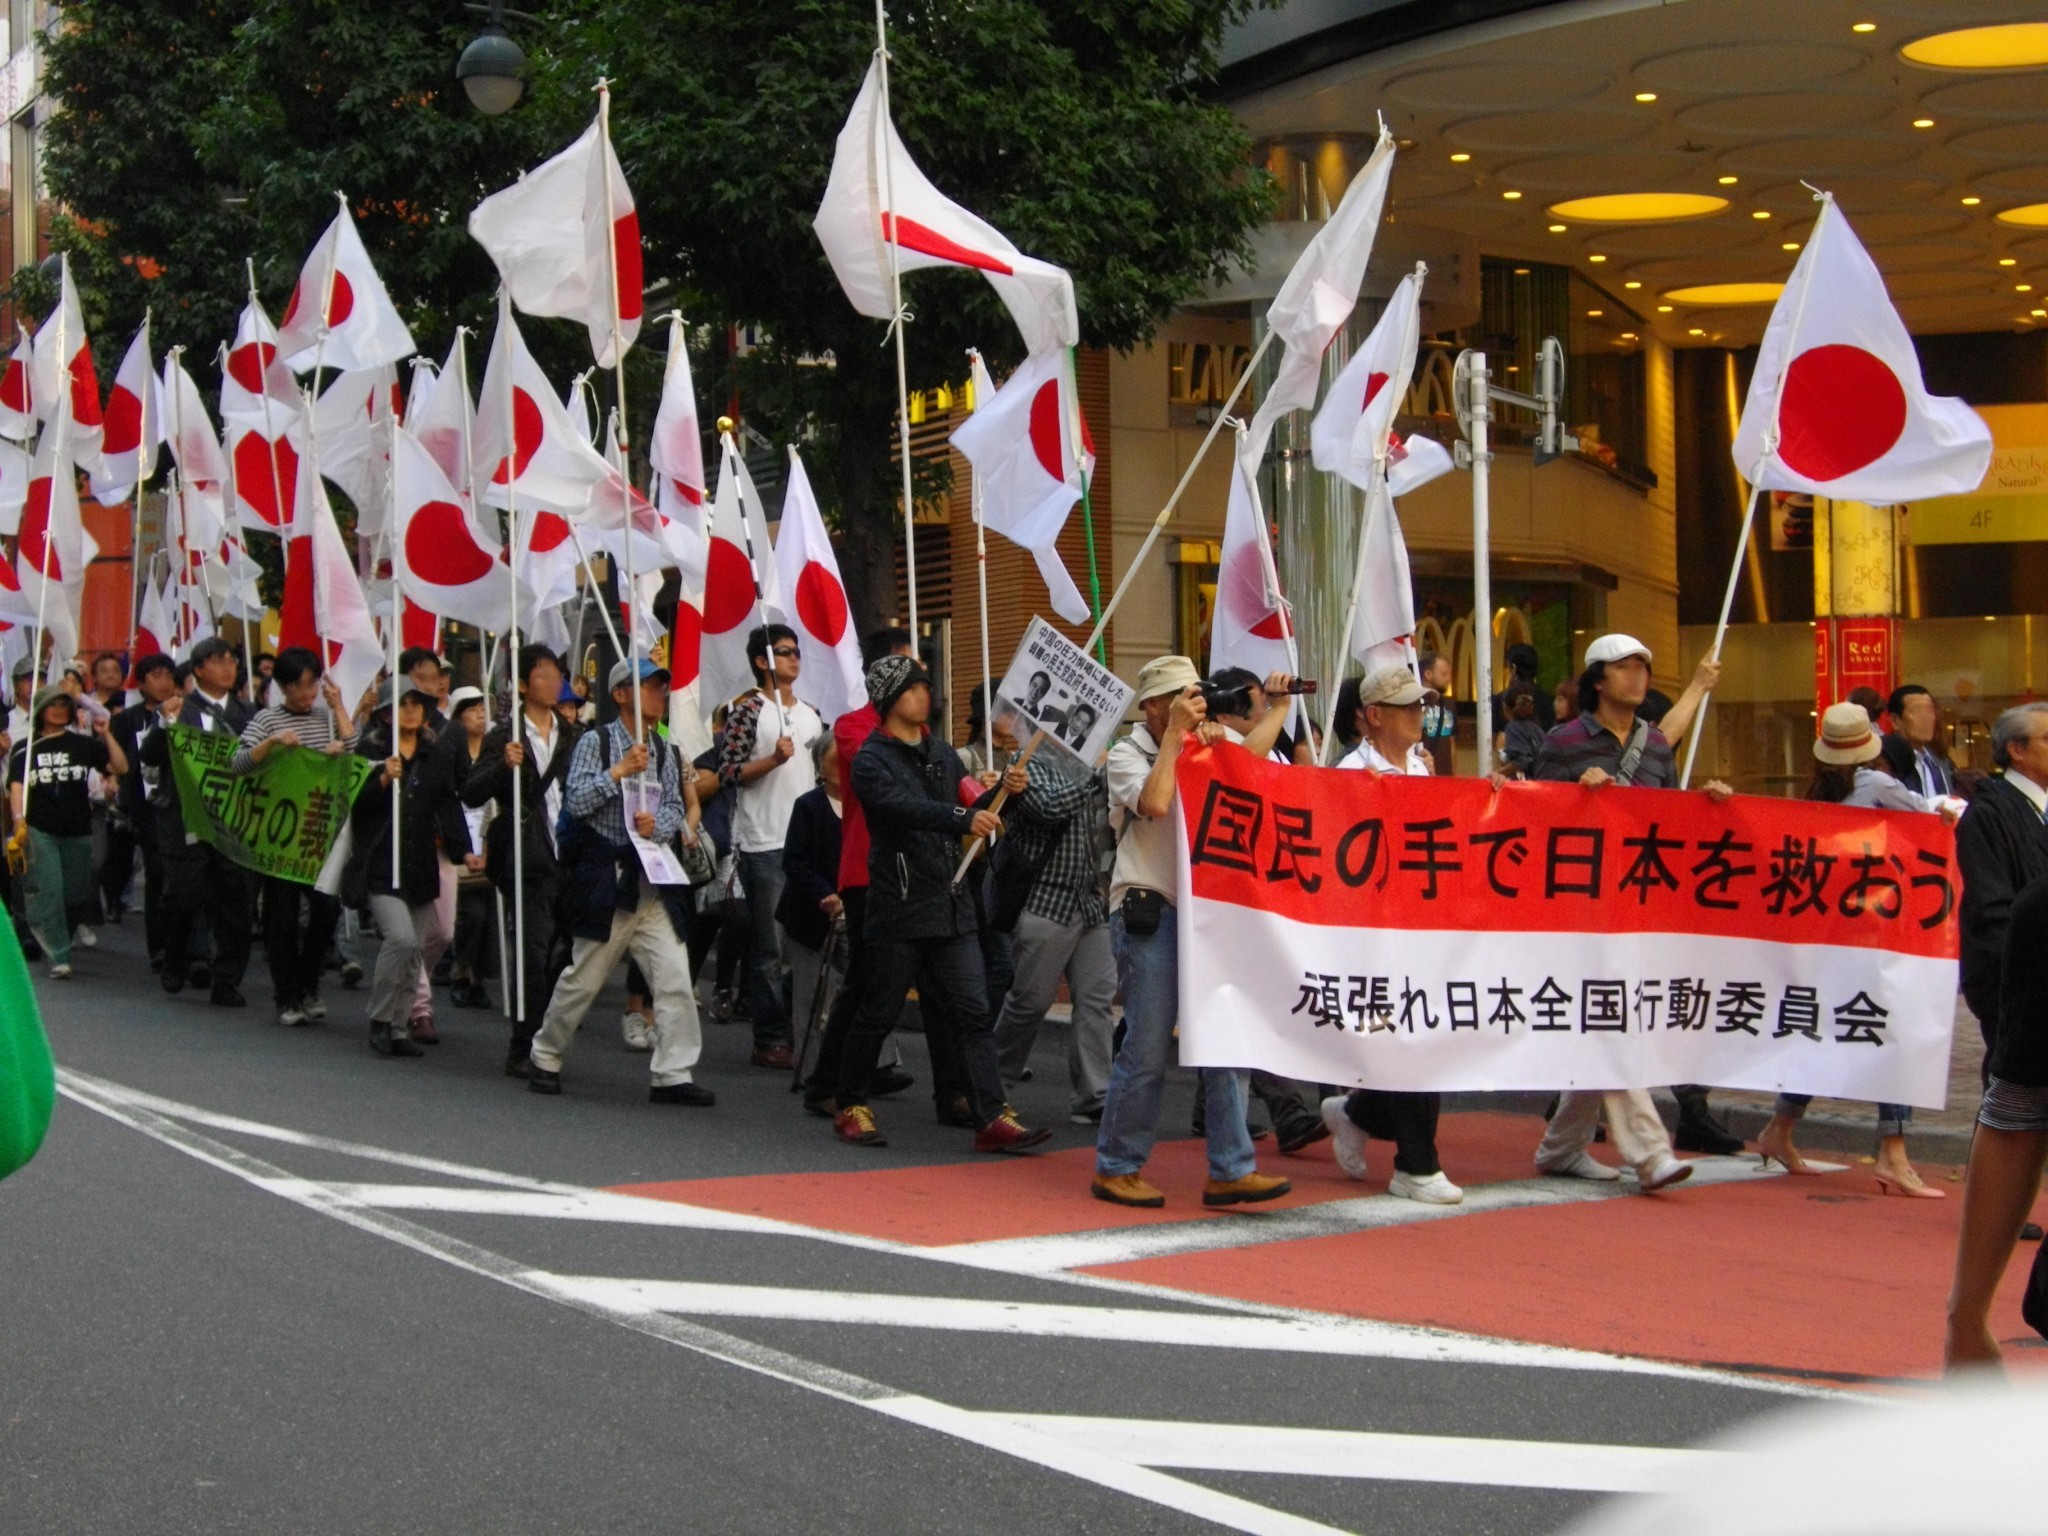 Anti-Chinese sentiment in Japan - Wikipedia